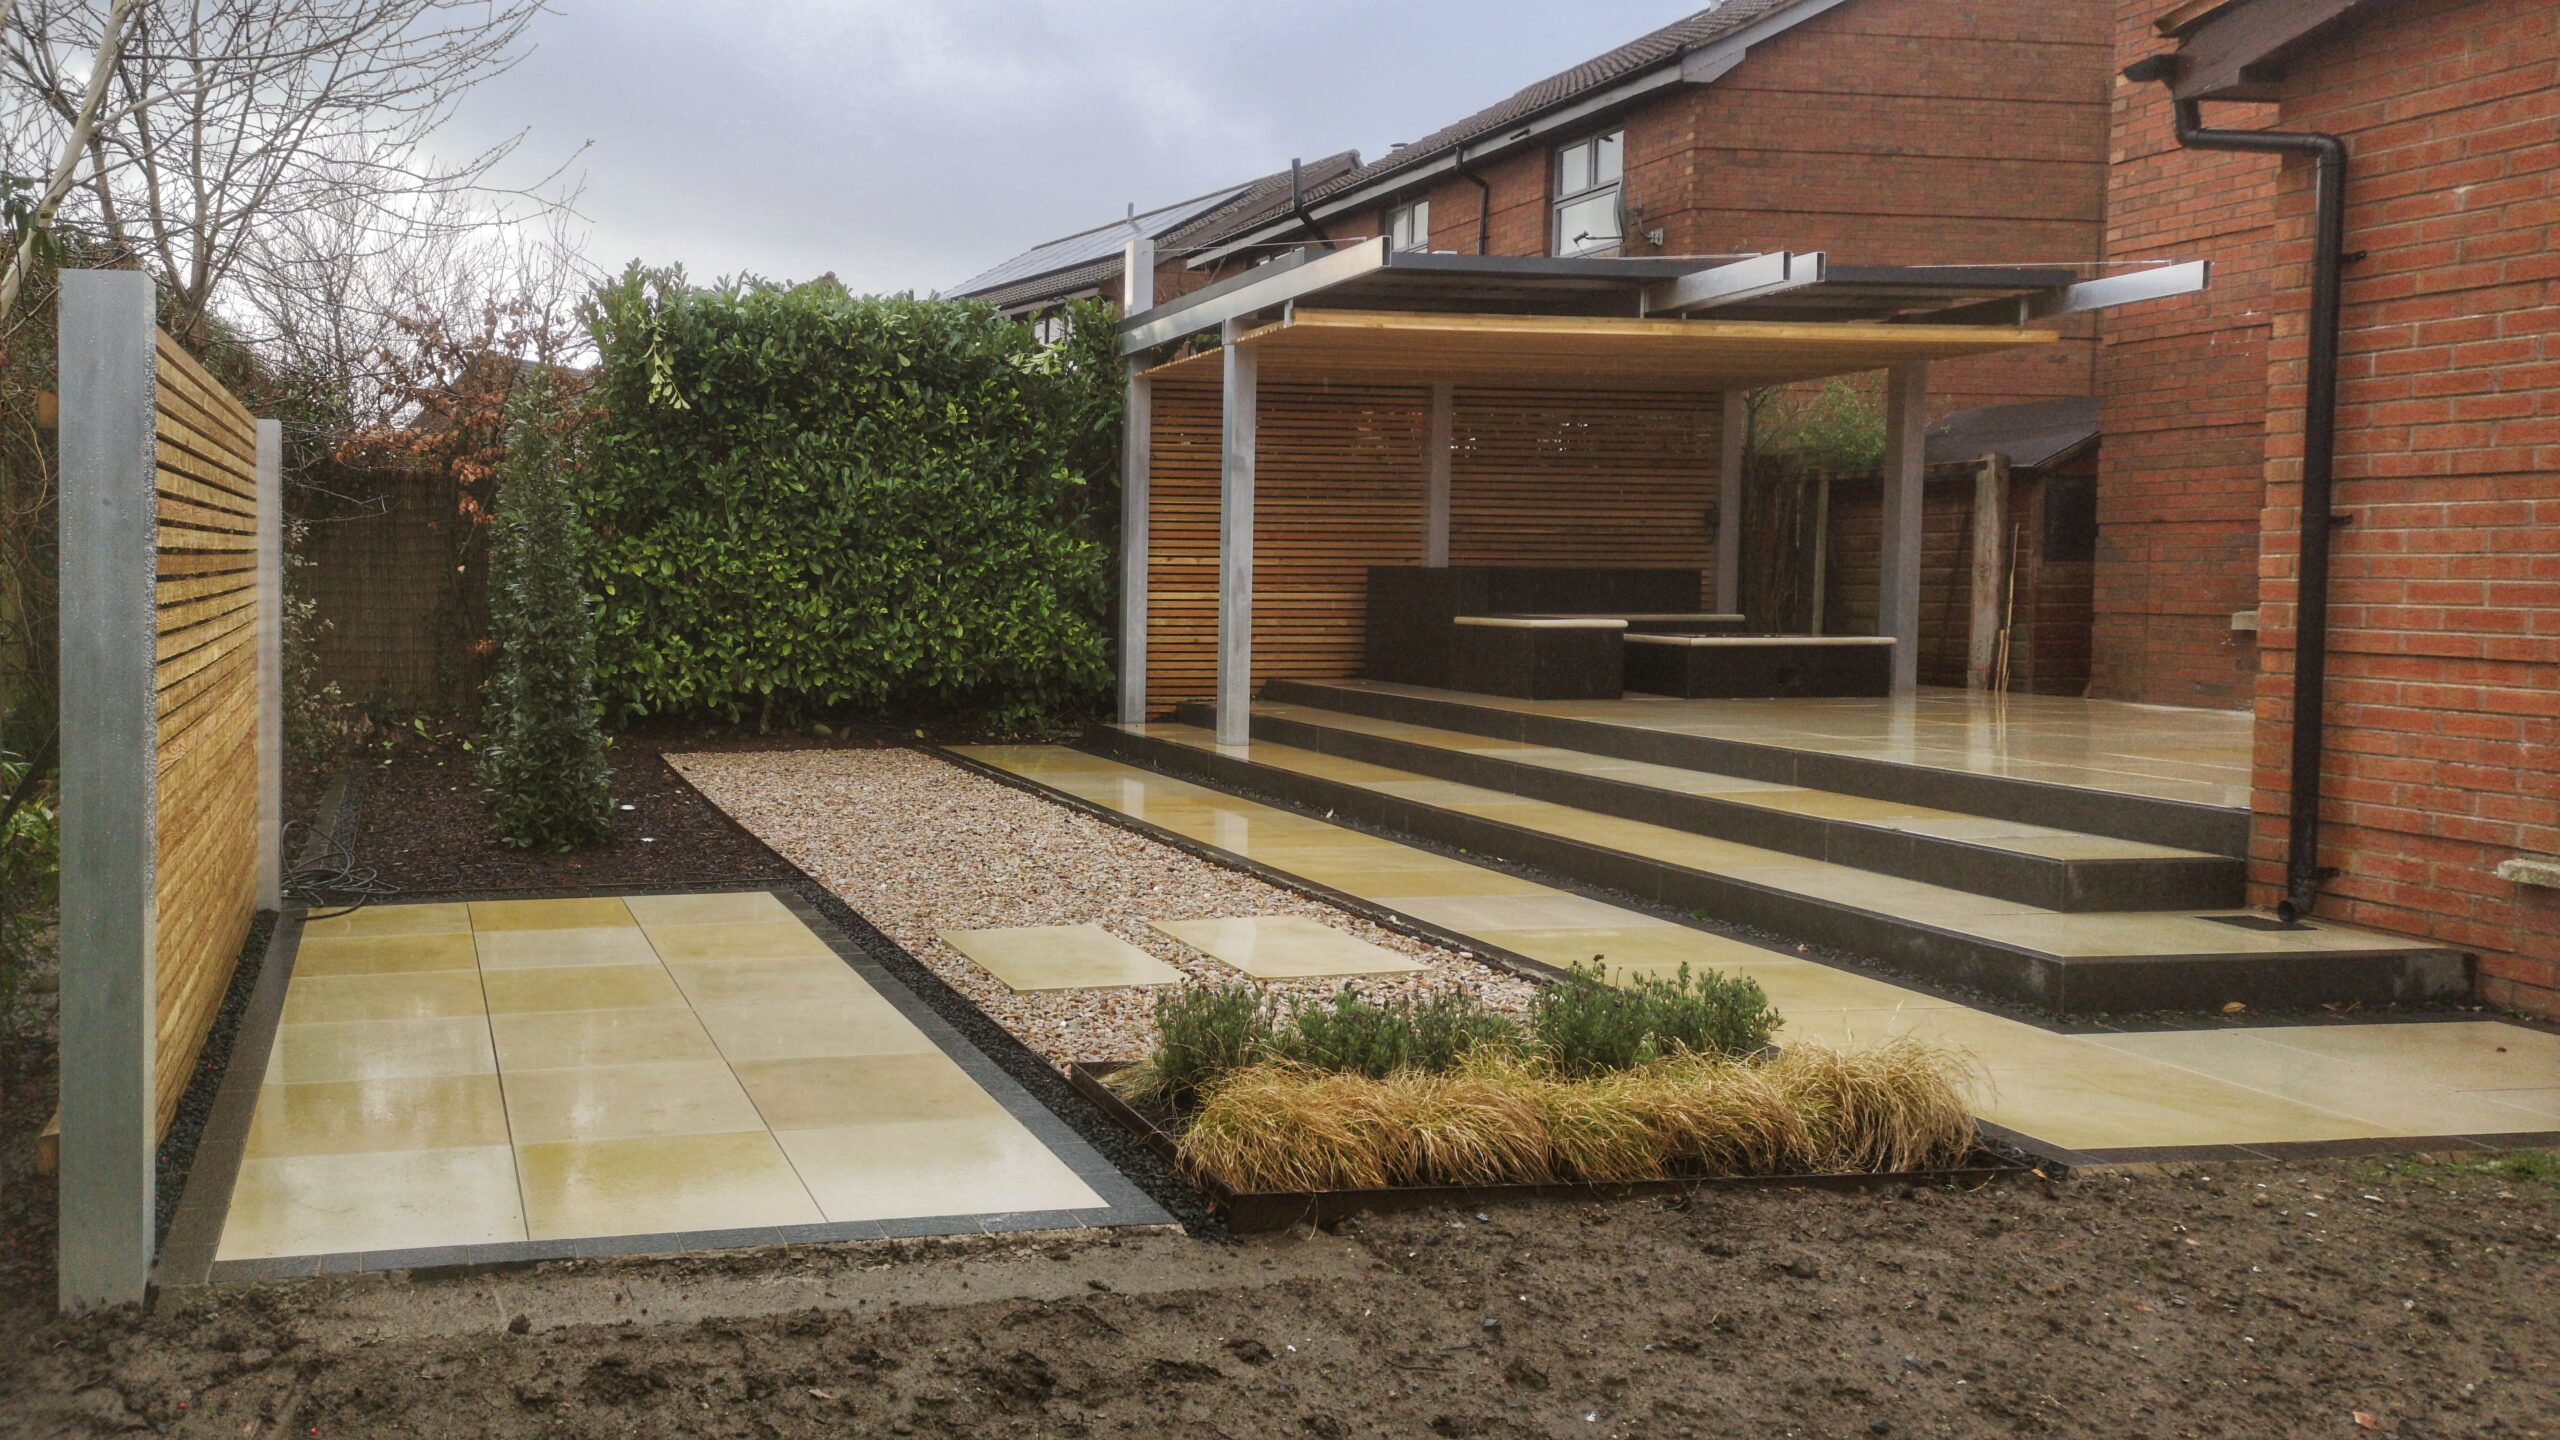 Sandstone patio with an aluminium pergola, gas fire pit and larch screening.